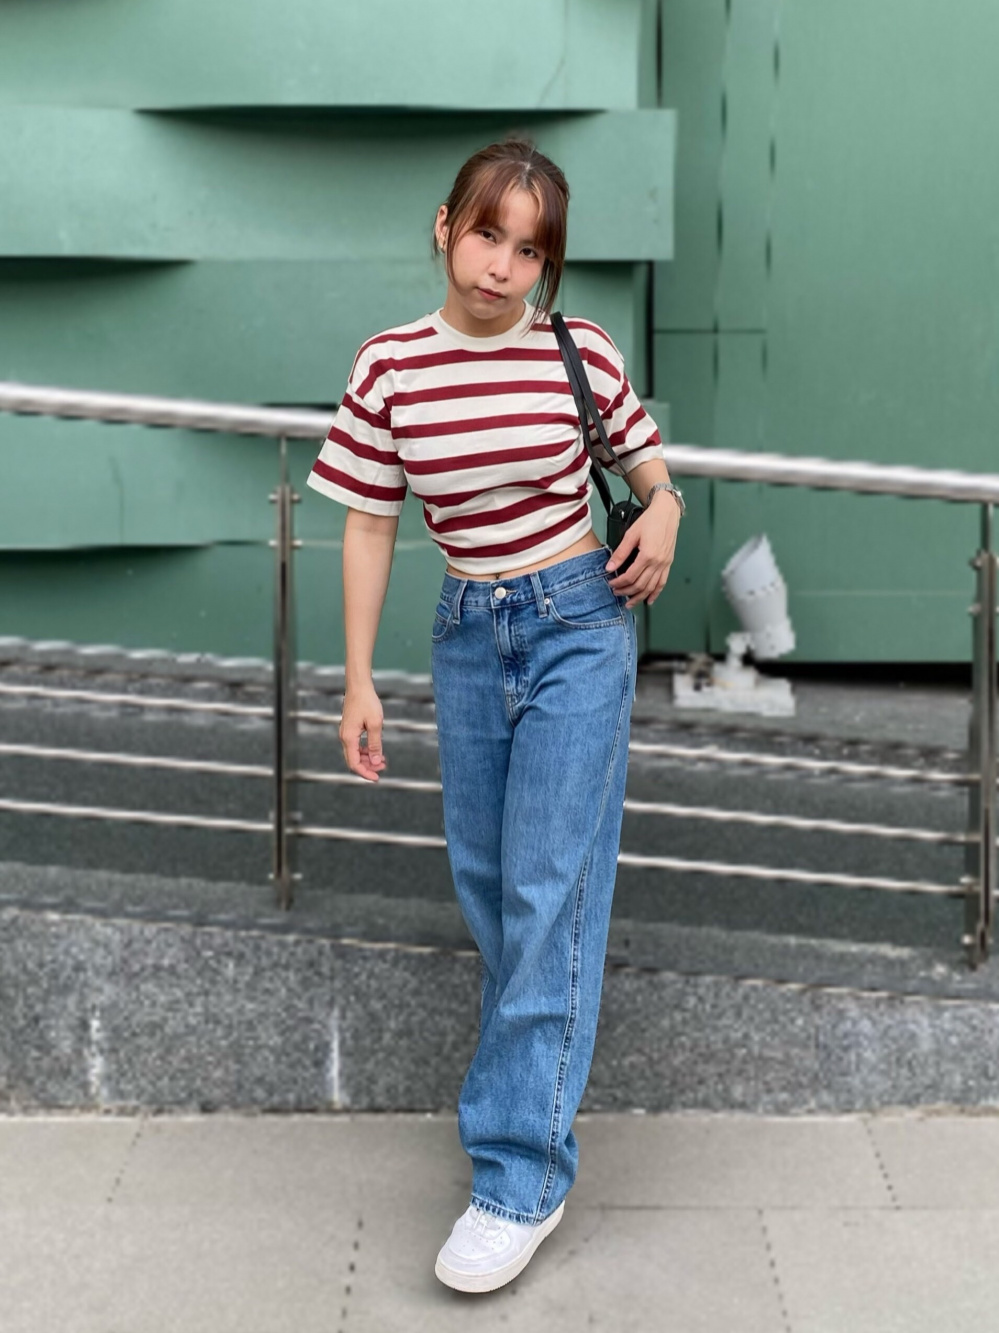 Check styling ideas for「Baggy Jeans」